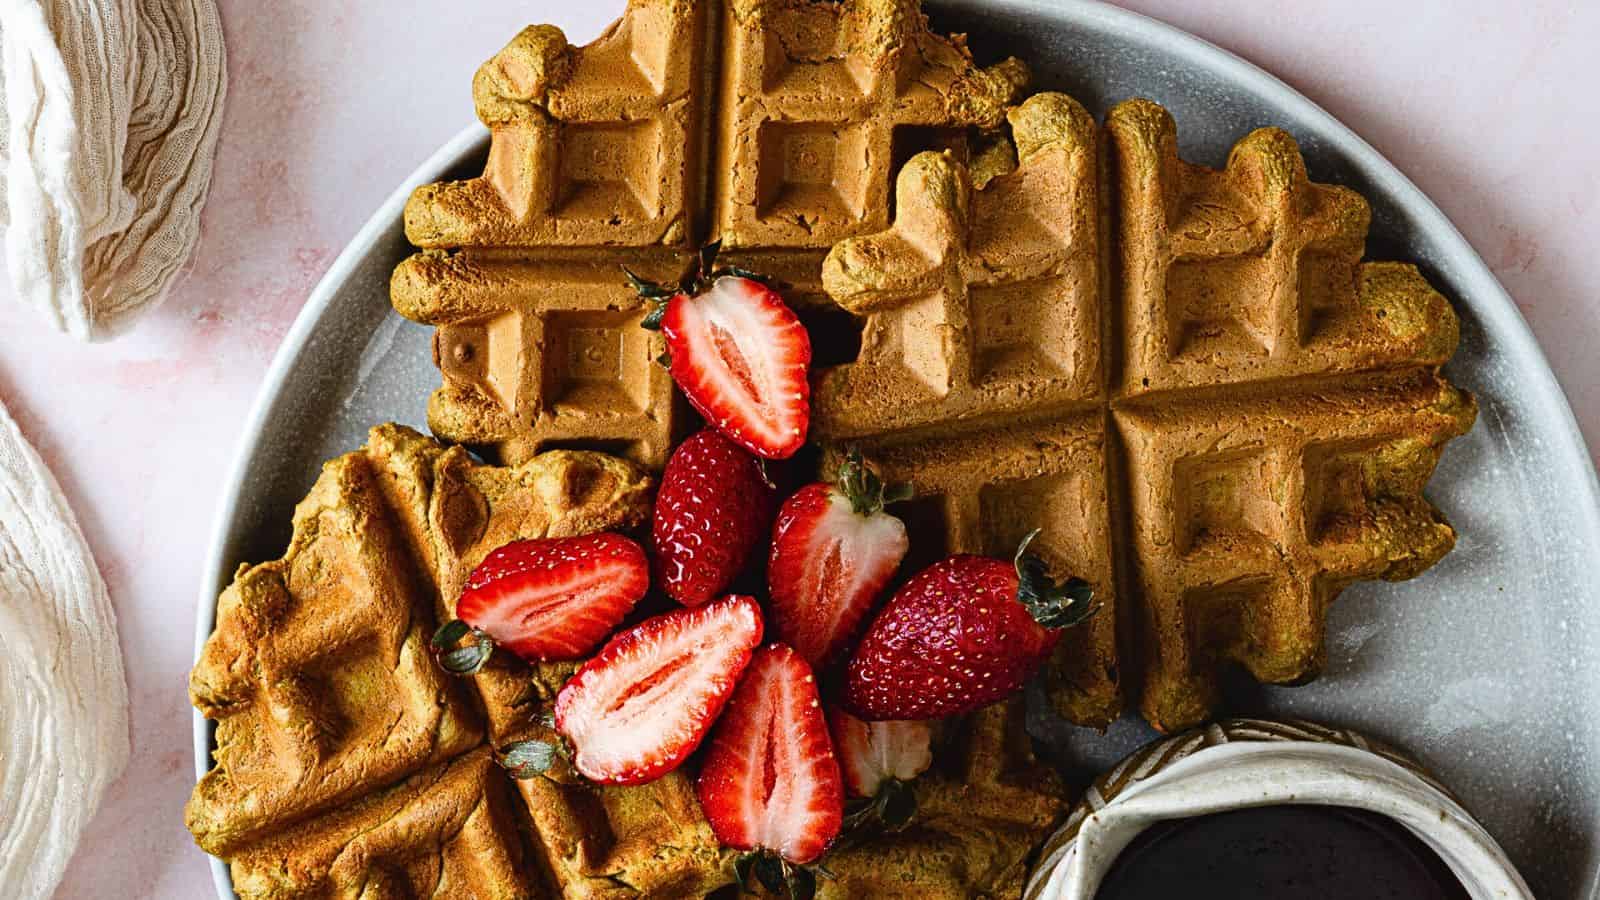 Fluffy Pumpkin Protein Waffles with Chocolate Sauce (17g Protein Per Waffle!).